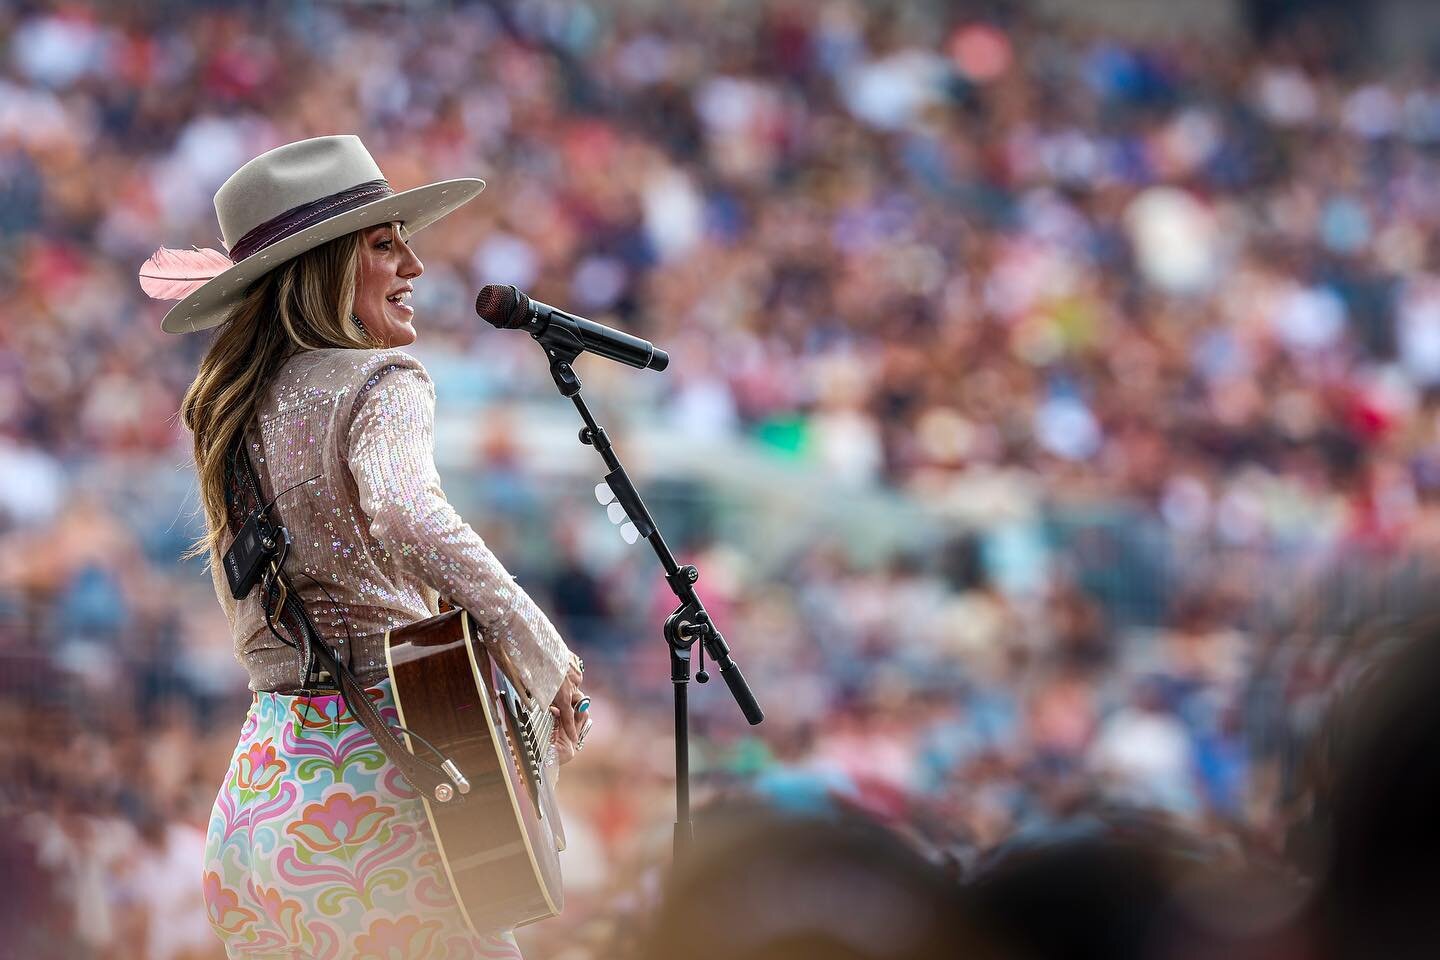 Lainey Wilson performing in front of an amazing crowd. @laineywilsonmusic @canonusa @davidbergman #laineywilson #country #countrymusic #music #guitar #crowd #fans #audiance #stadium #shootfromthepit #tampa #tampabay #cowgirl #cowboyhat #feather #yell